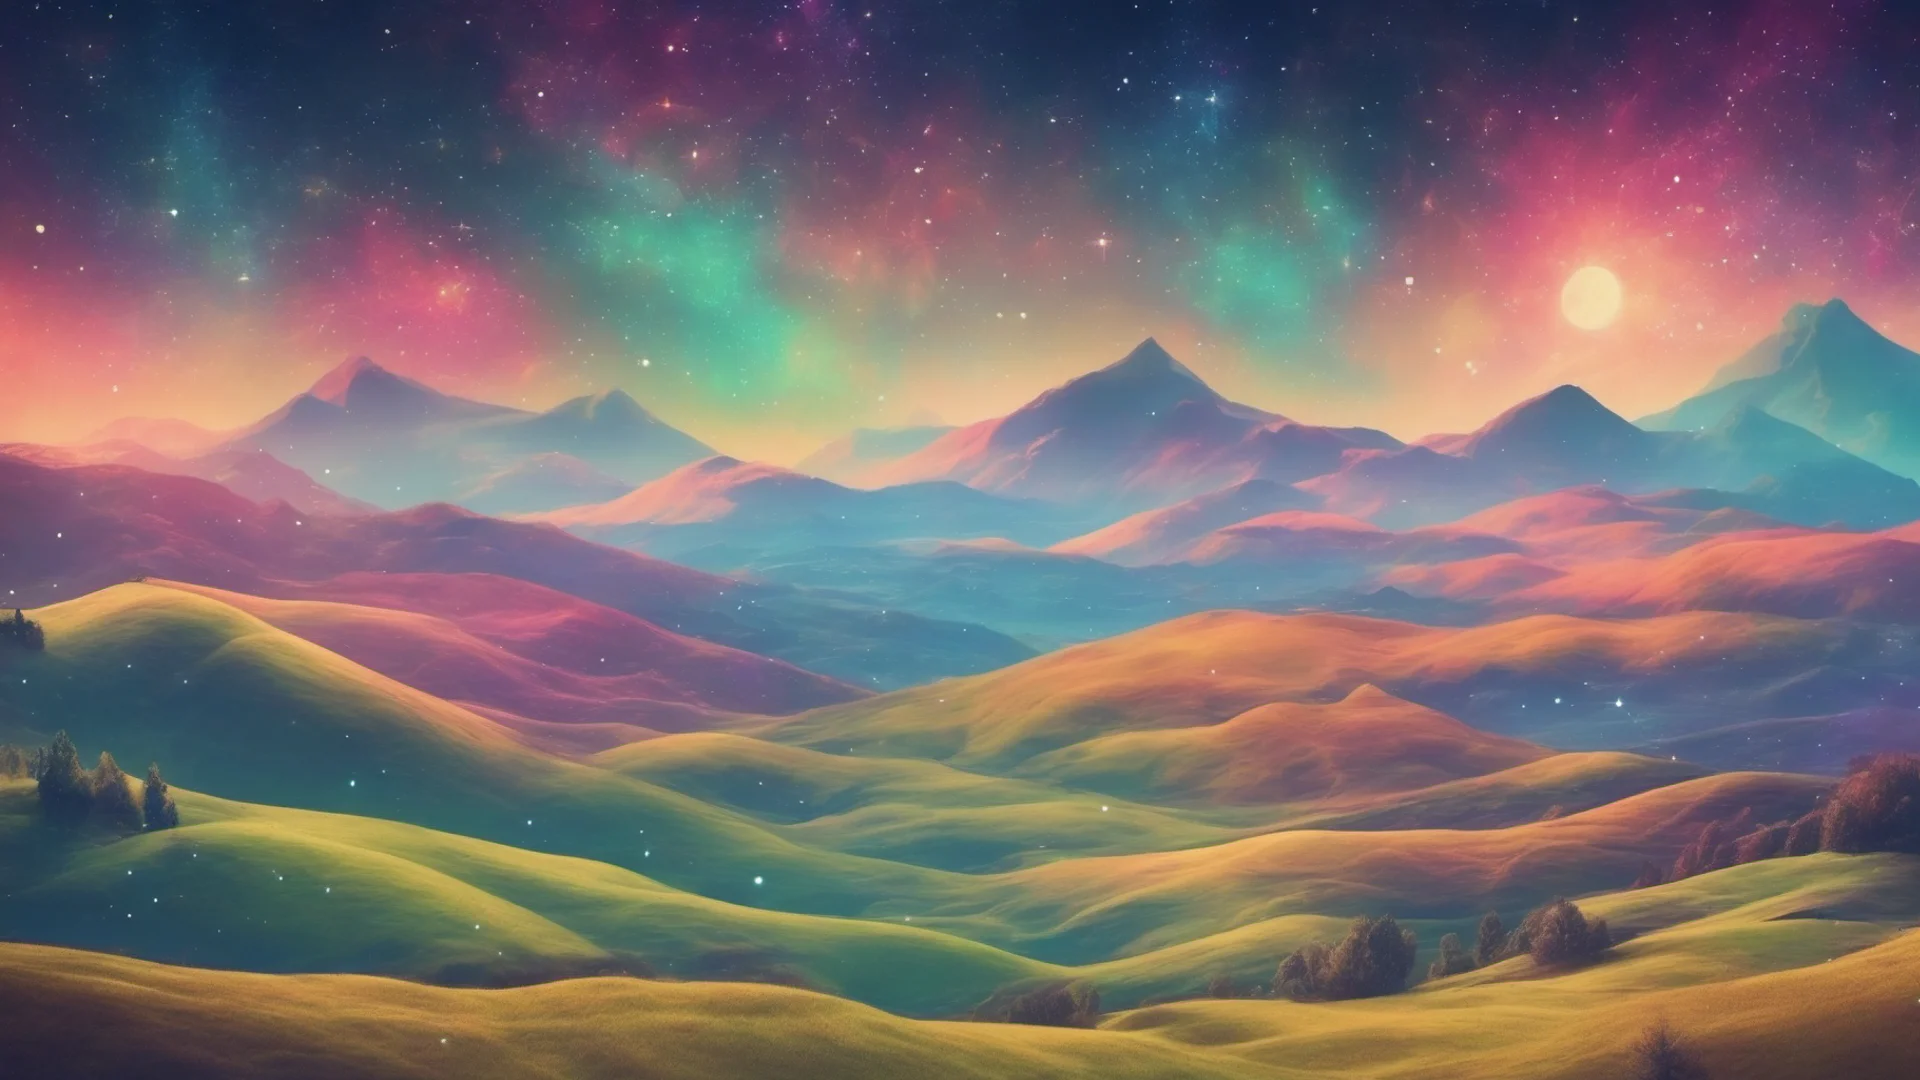 aiamazing background gentle rolling hills valleys colorful fantasy universe stars good looking trending fantastic 1 wide